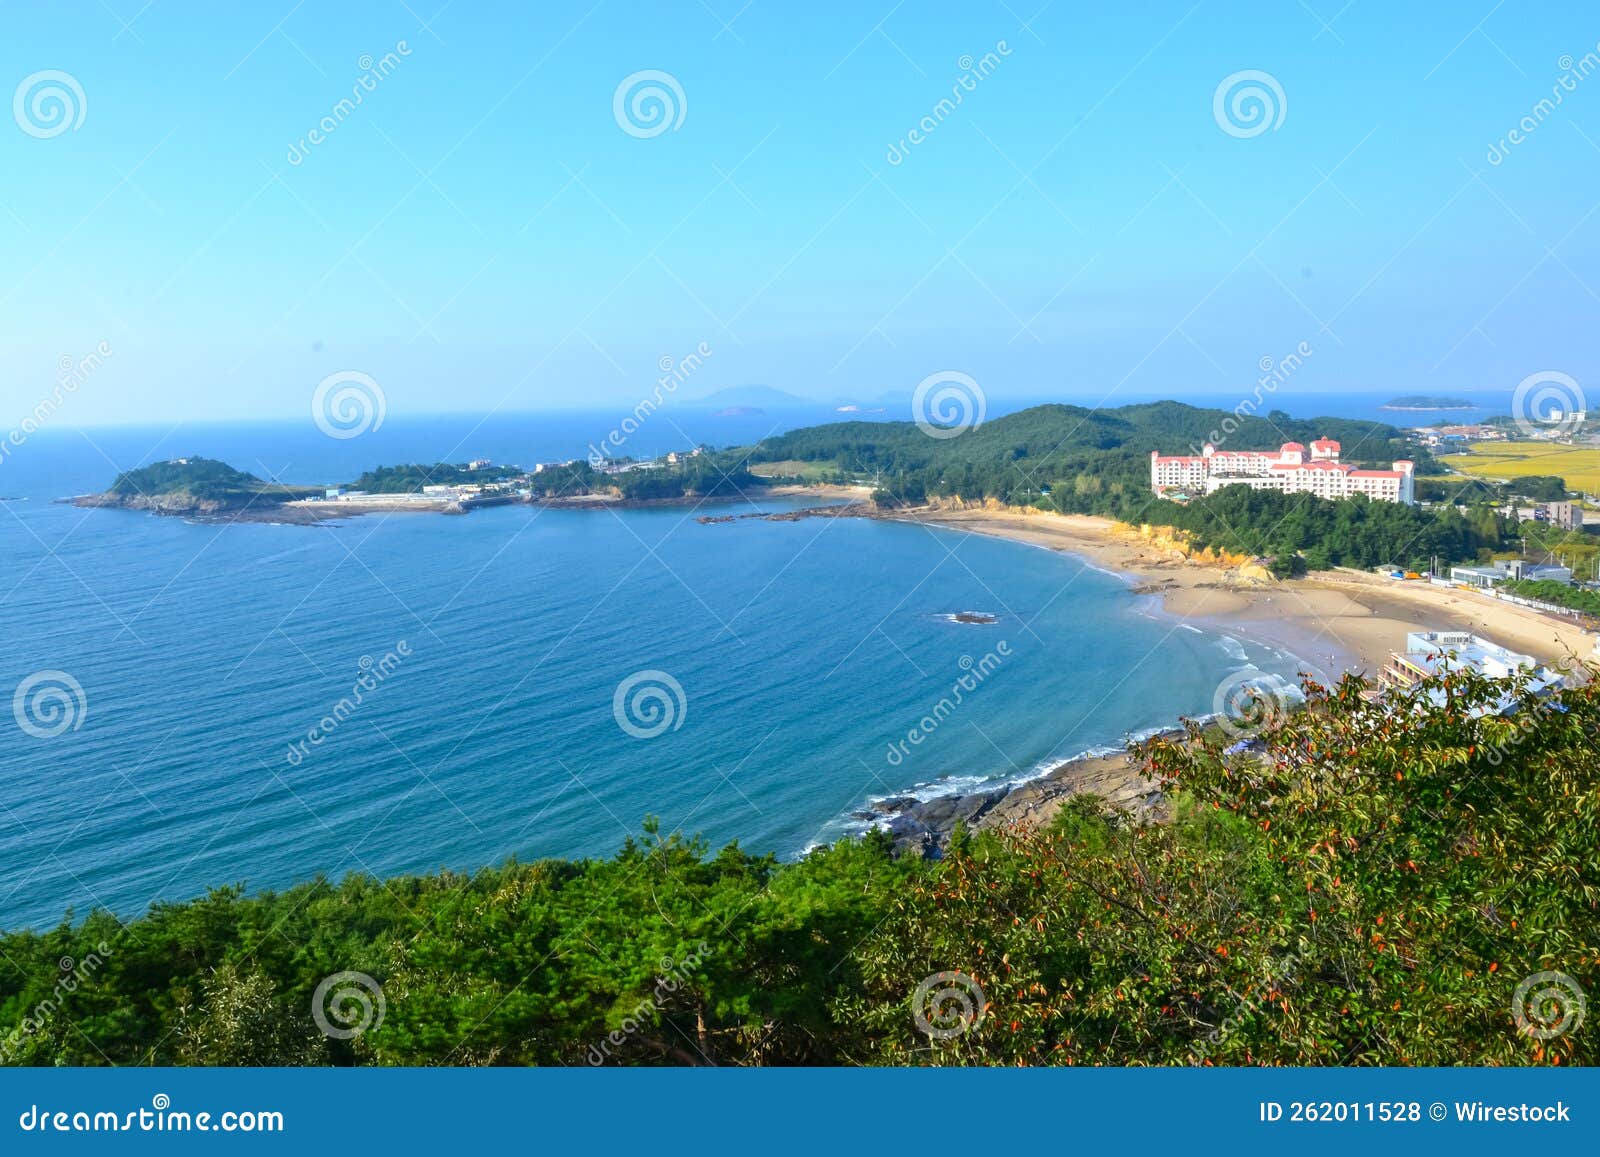 beautiful shot of the beach and a white building on the hill in byeonsan-bando national park